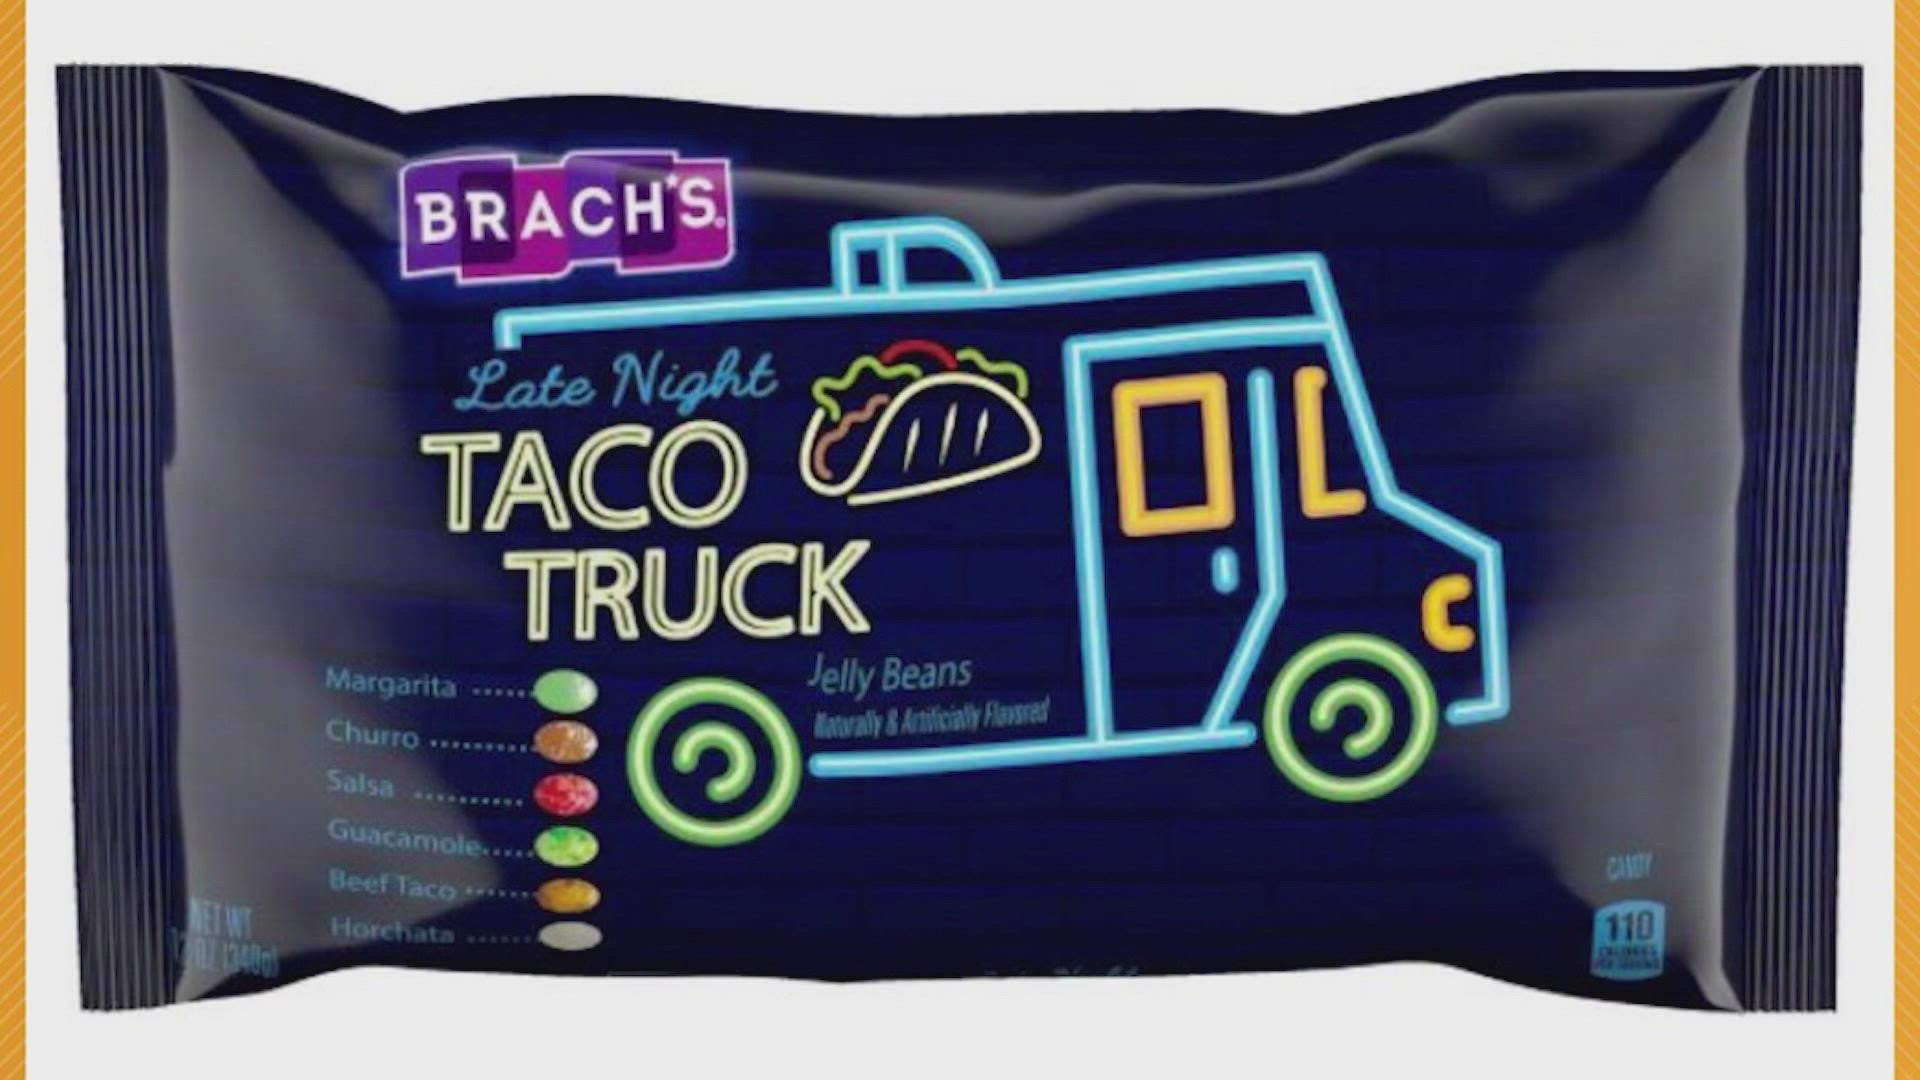 Brach's new taco truck flavored jelly beans come in fix flavors of green, brown, red and white.